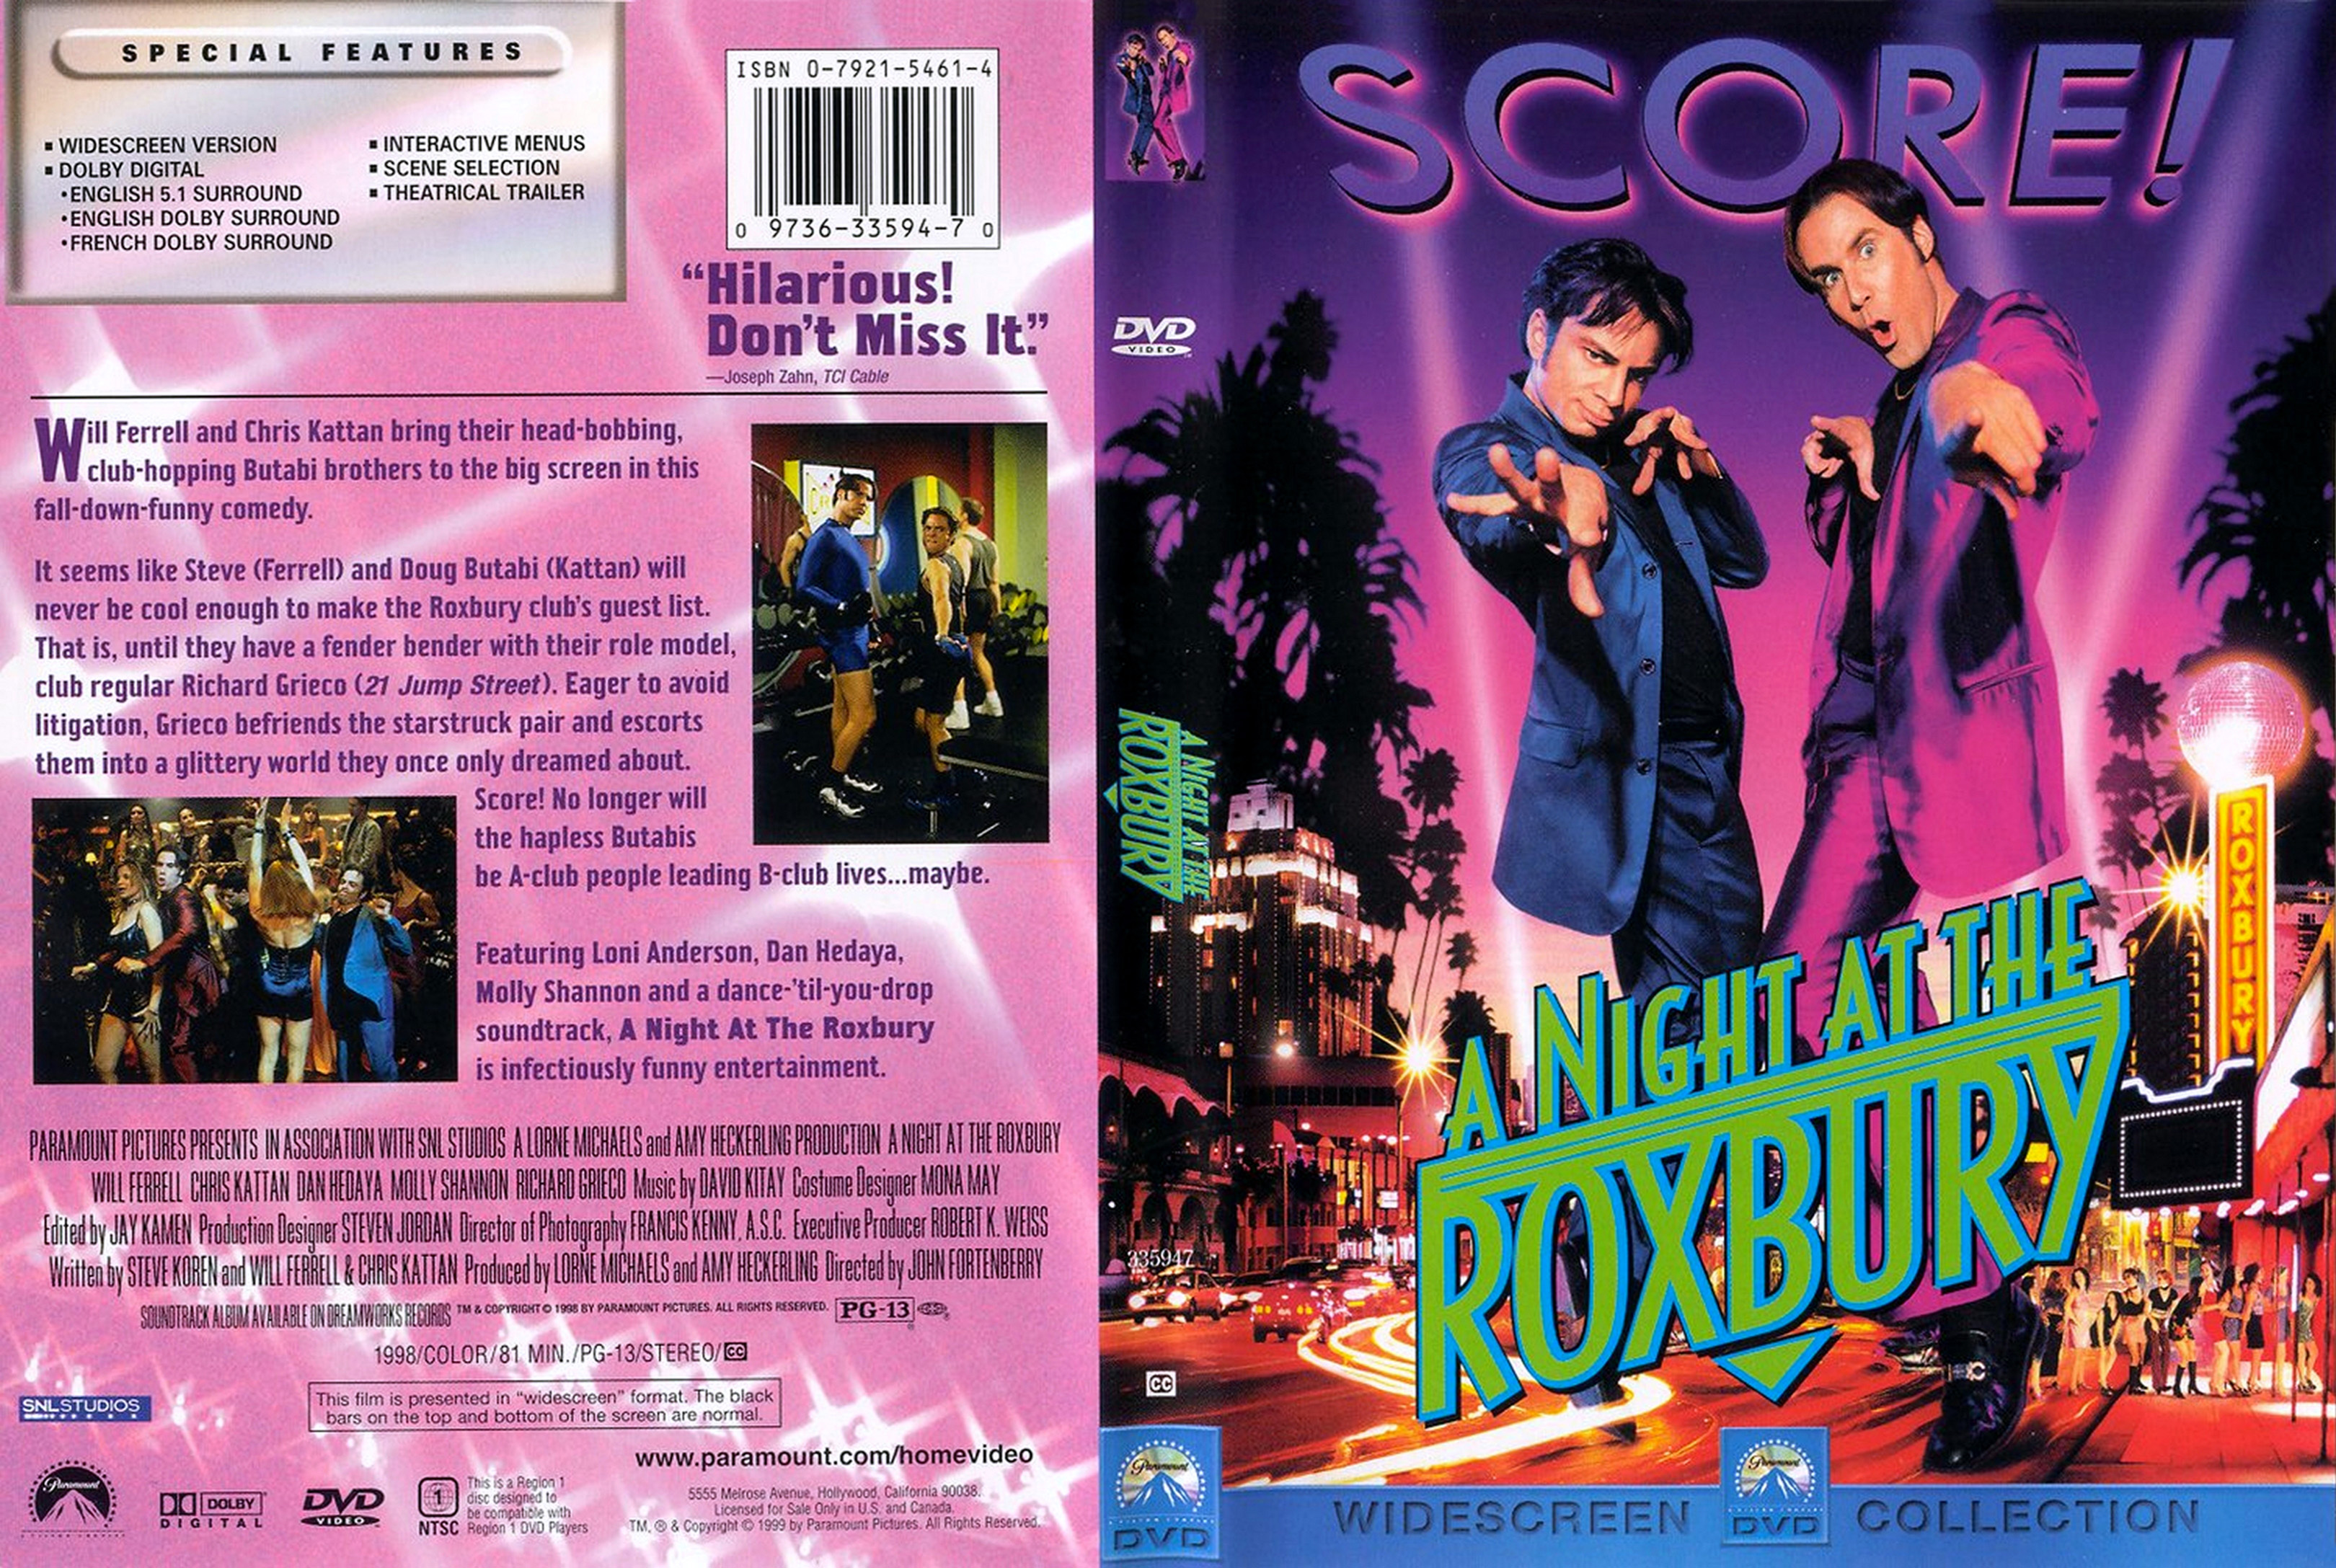 COVERS.BOX.SK A Night at the Roxbury 1998 - high quality DVD